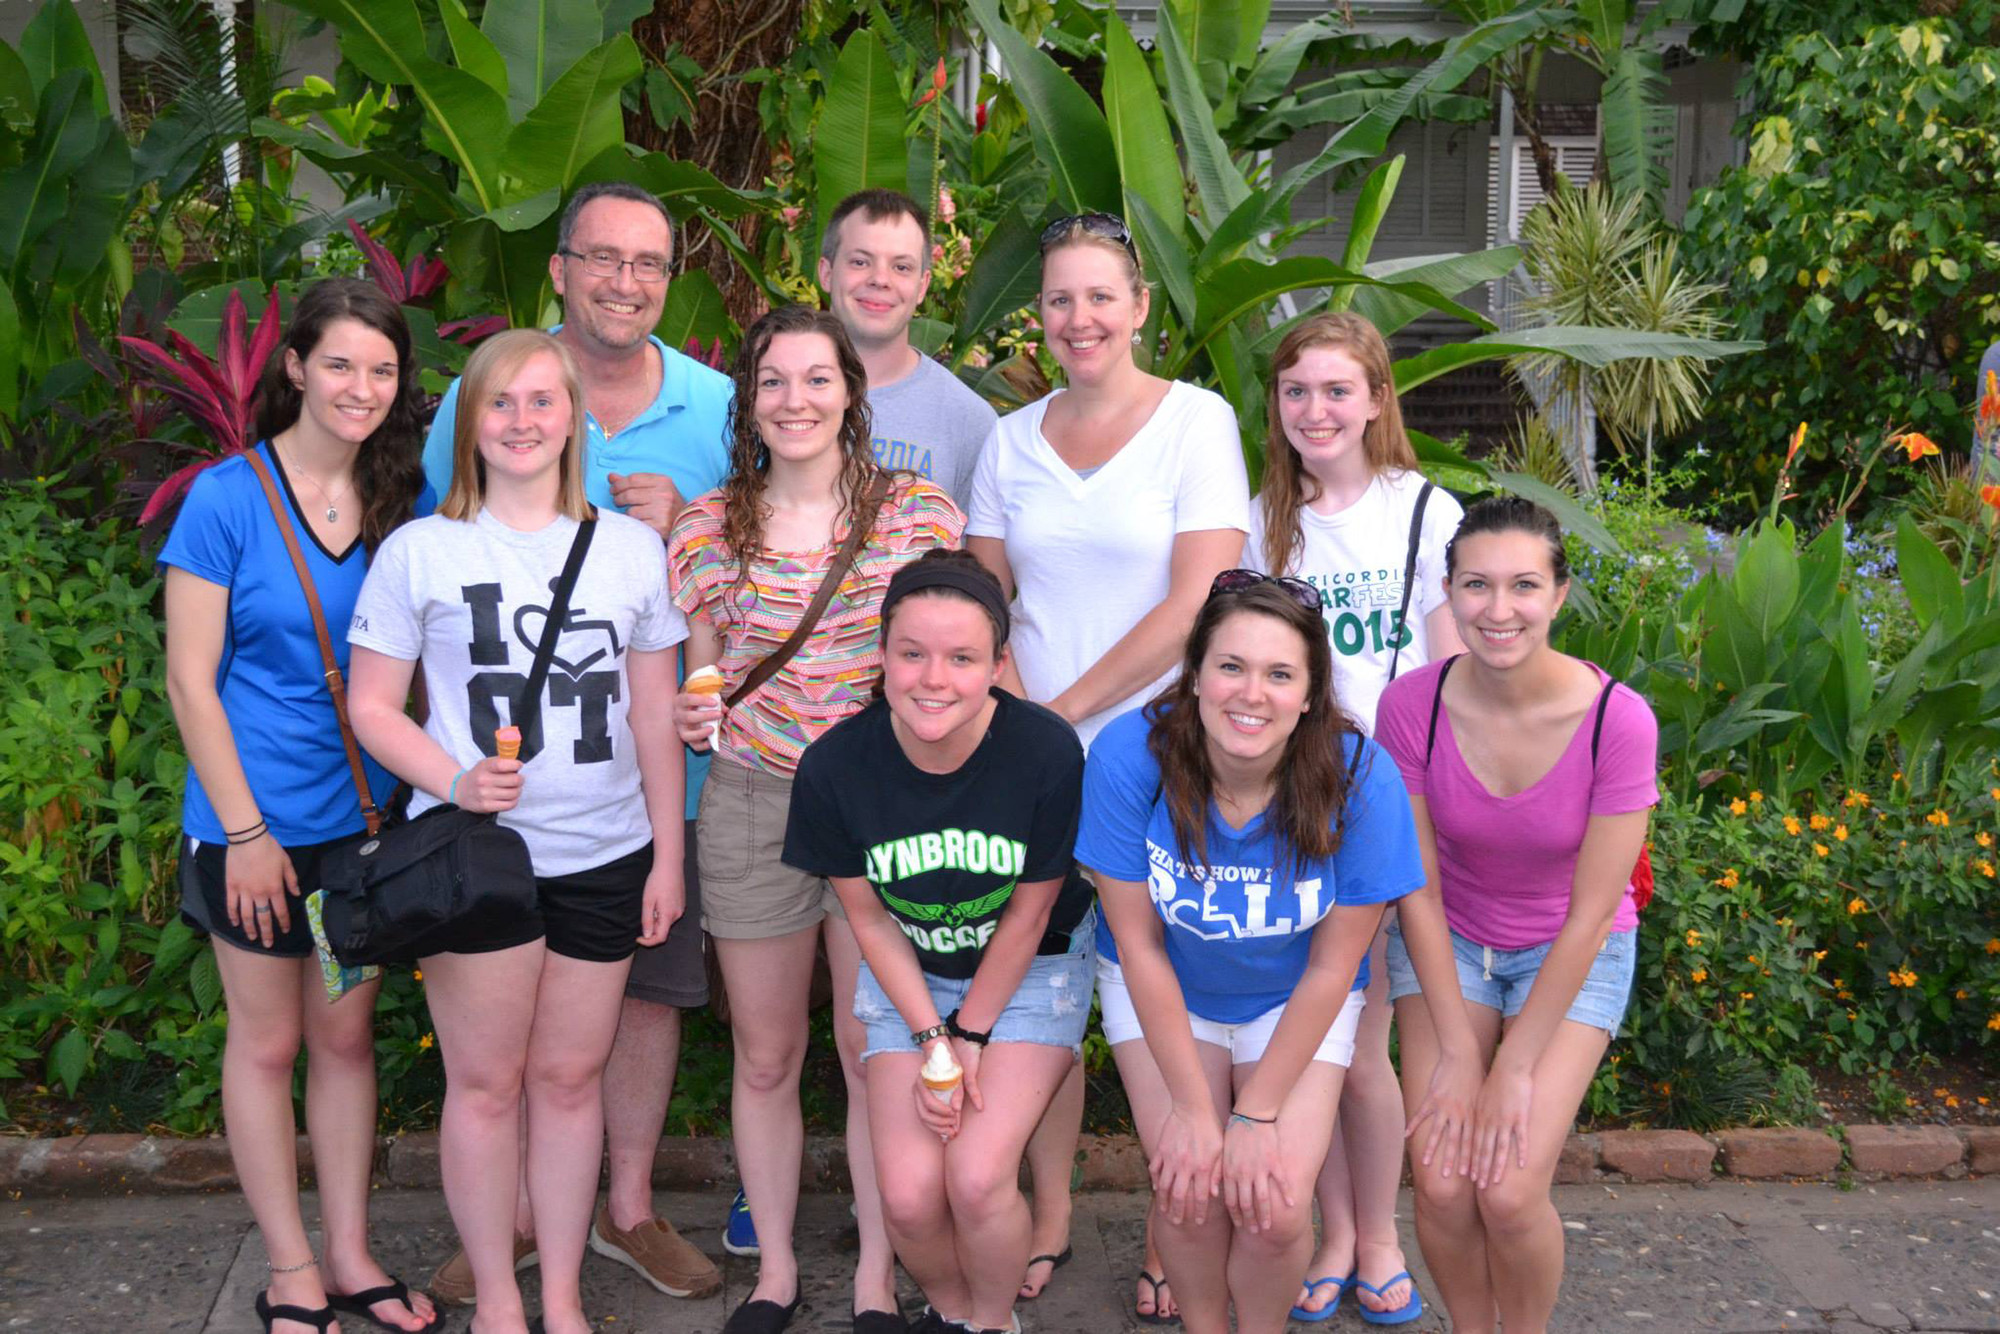 Misericordia University students and faculty who took part in the service-learning mission to Jamaica, gathered for a photo. Picture from front row left: Kerrie Hall, Lynbrook, Kristi Cianfichi, Moscow; and Amanda Casem, Mountain Top. Second row, from left: Mary Boyle, Fairfield, Ct.; Maria Weidemoyer, Perkiomenville; Jamie Opela, Binghamton; Jennifer Dessoye, OTR/L, assistant professor, occupational therapy; and Deirdre Stevens, Schenectady. Third row, from left: Joseph Cipriani, Ed.D., OTR/L, professor, occupational therapy; and John Ignatovich, Forty Fort.